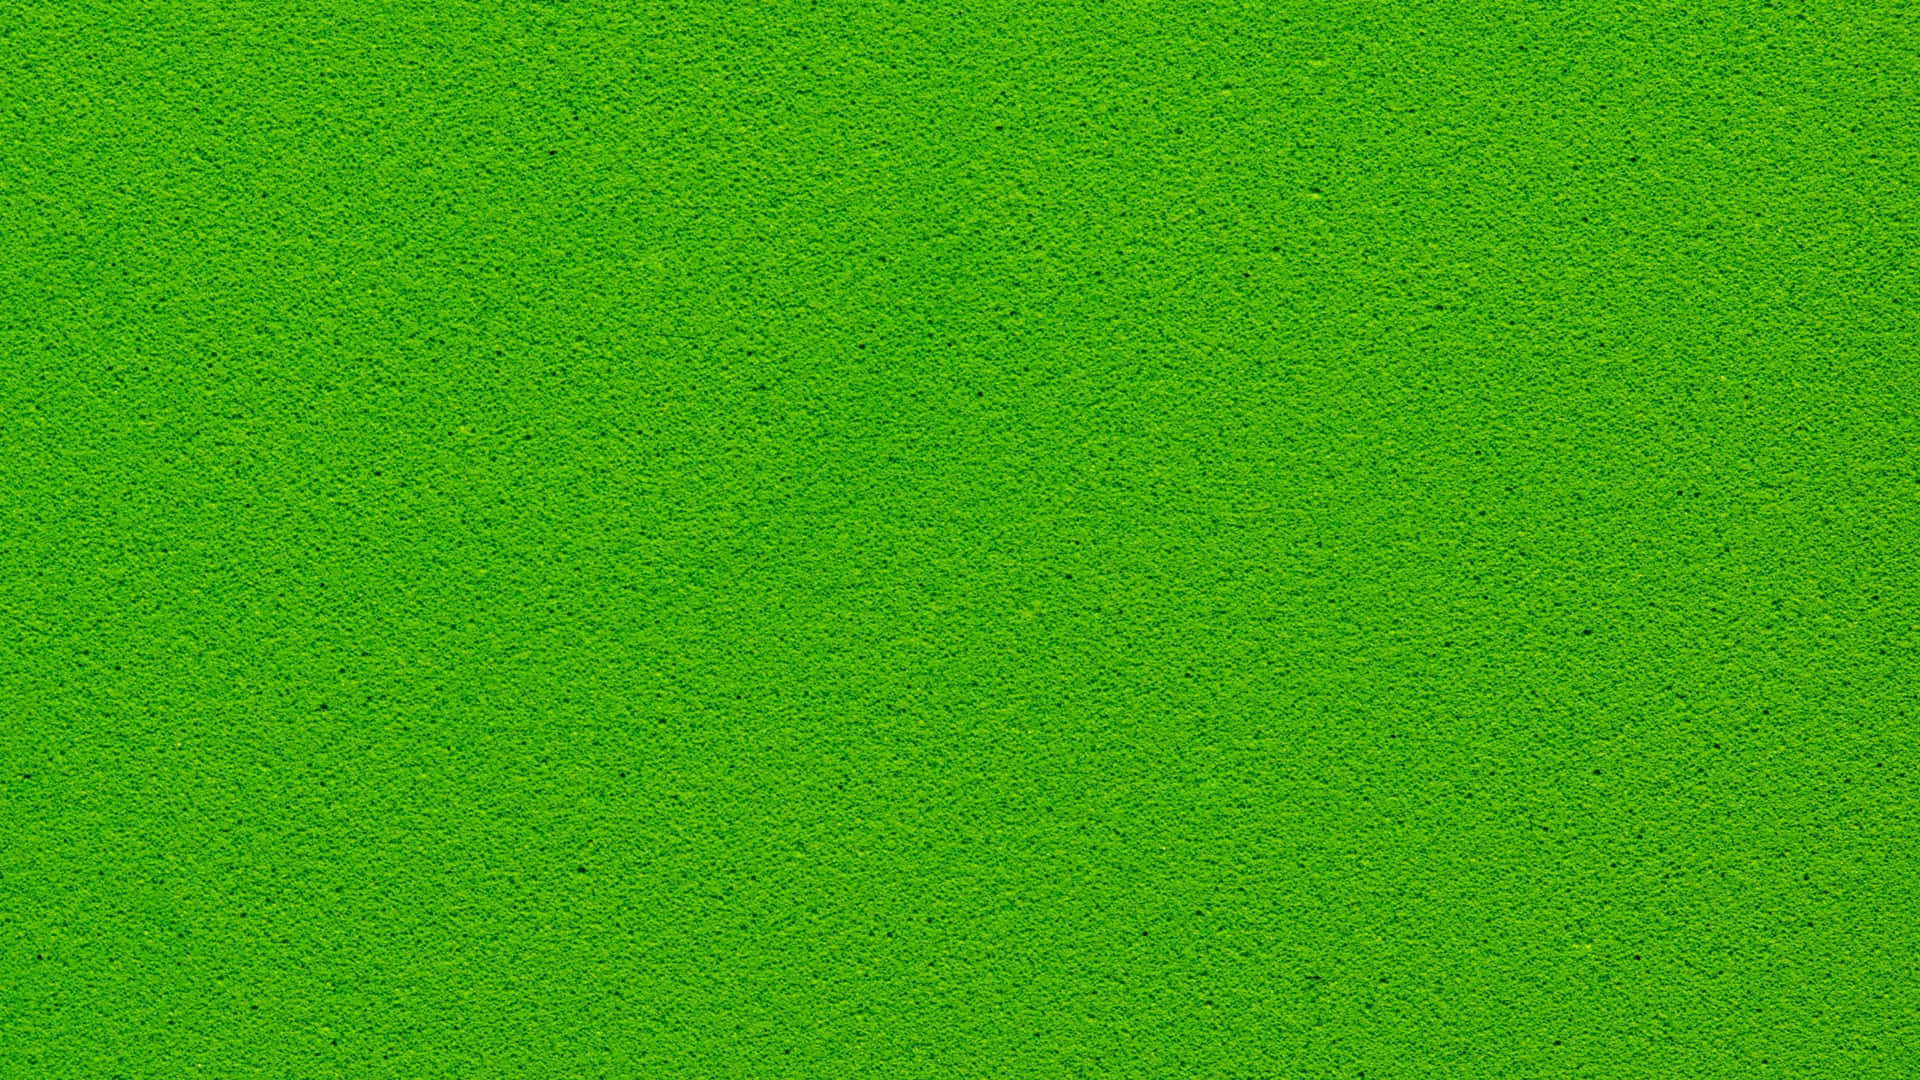 100+] Solid Green Background s 